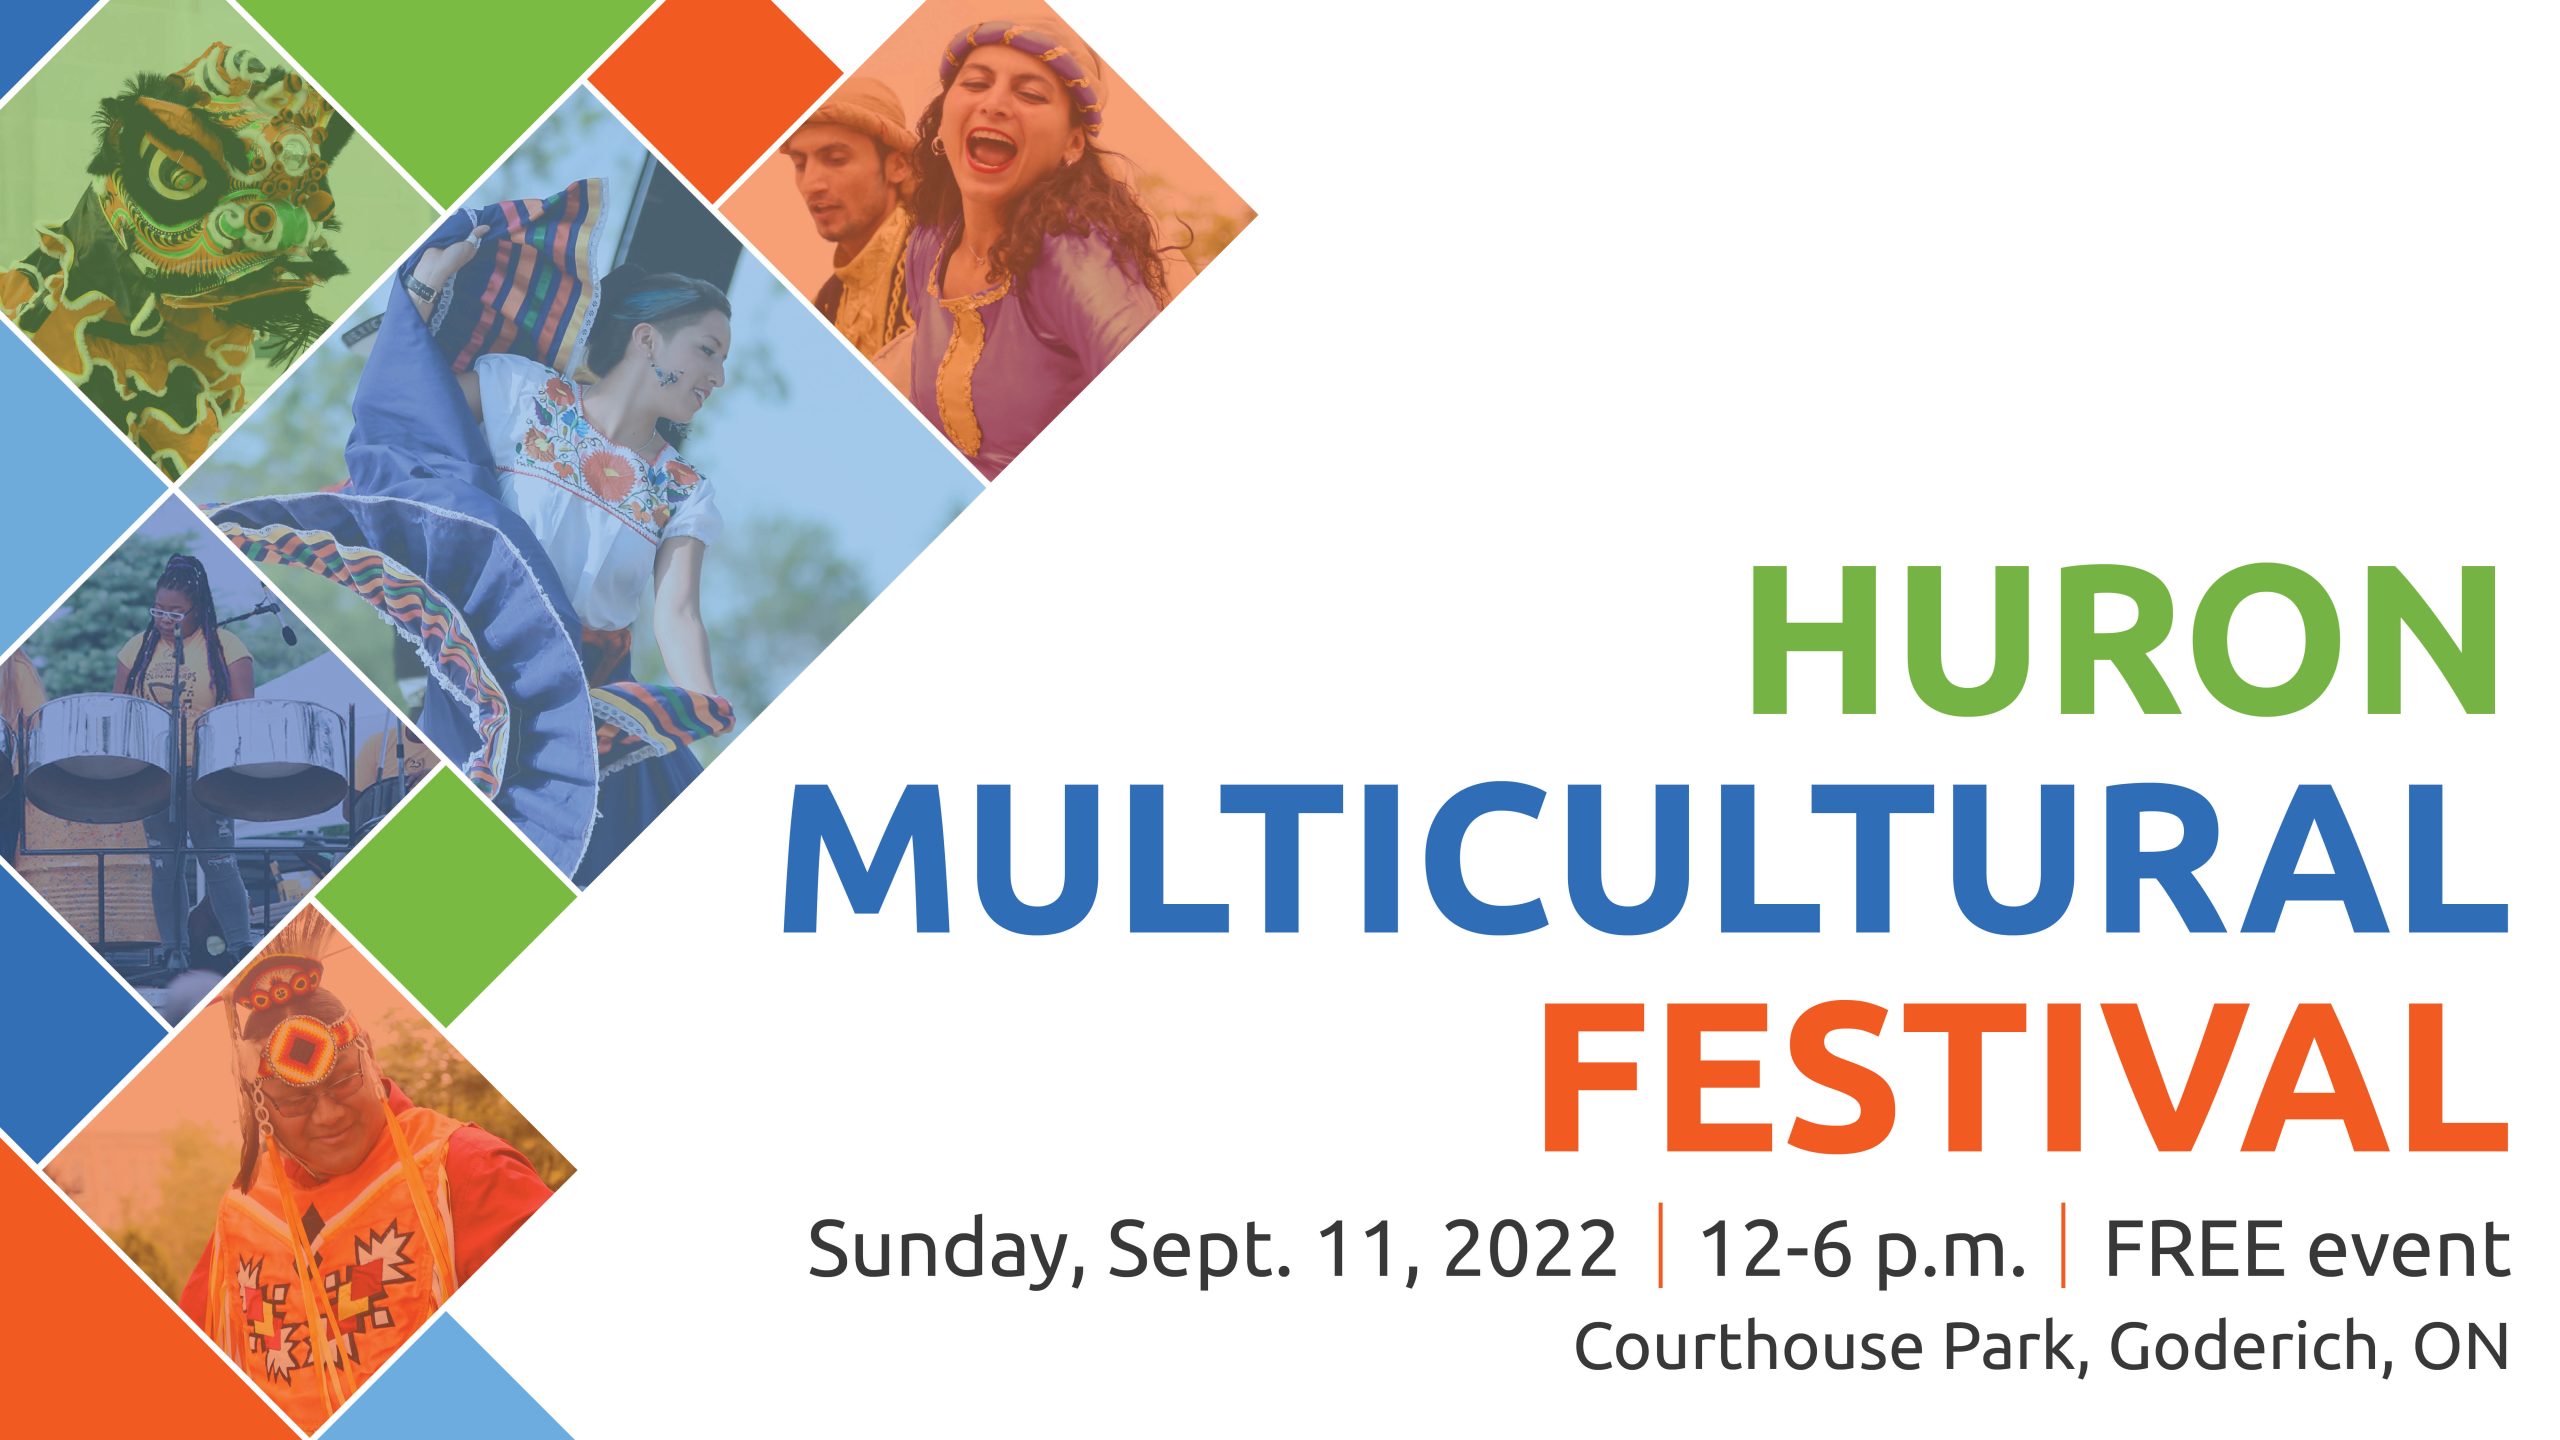 Graphic features images from past festivals with text promoting Huron Multicultural Festival